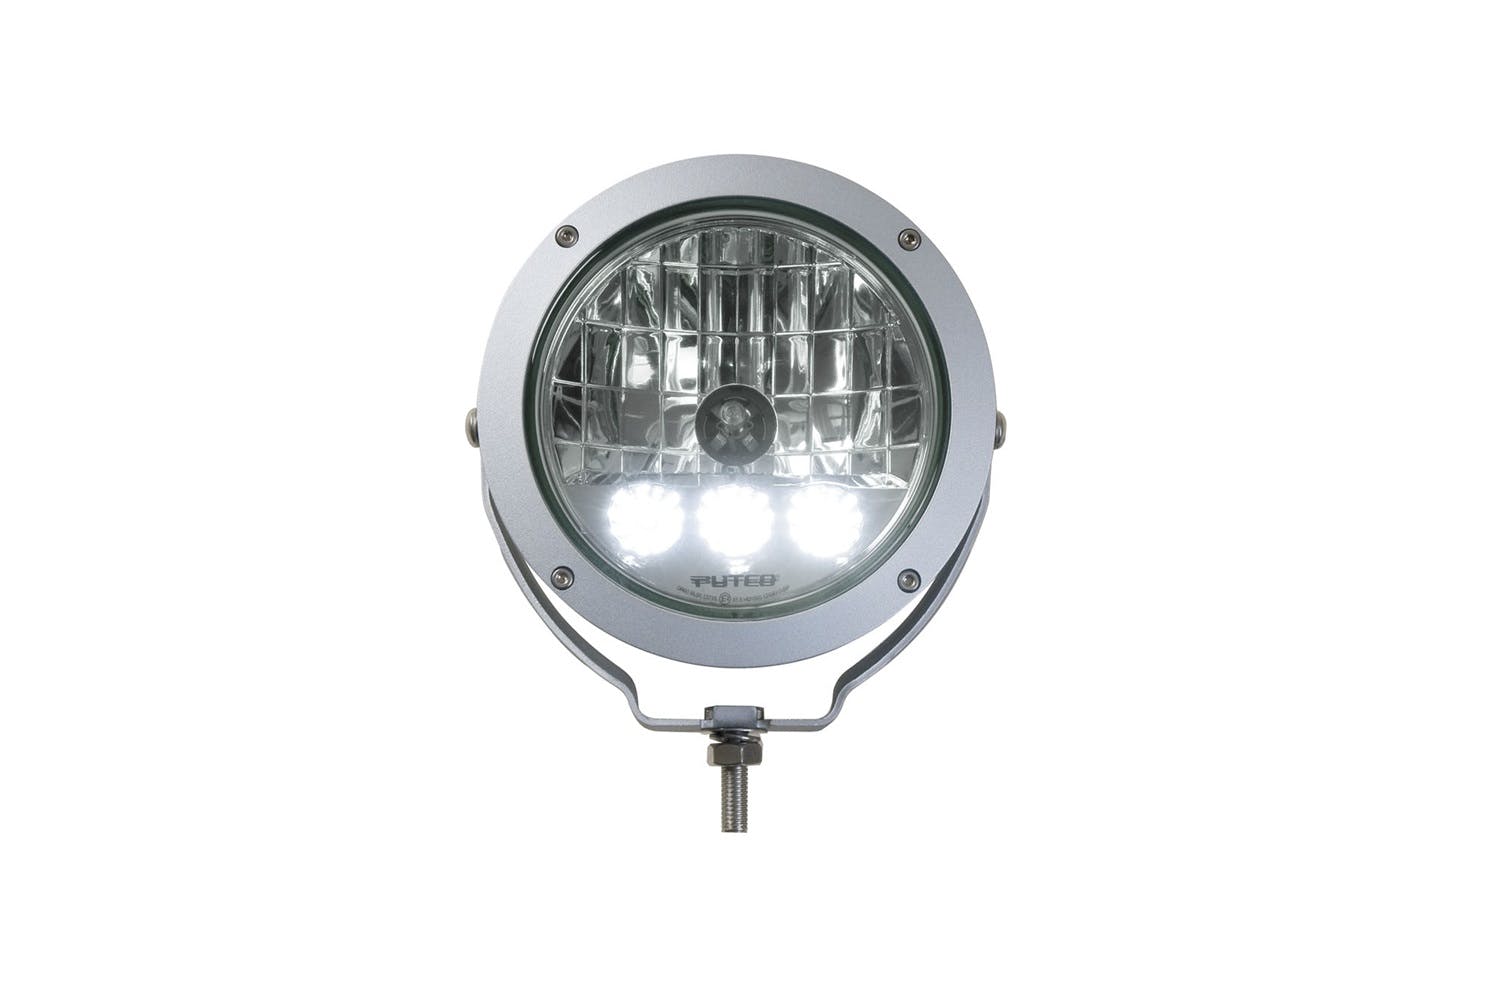 Putco 231900 HID Lamp w/3 LED Daytime Running Lights - 6 inch Silver Housing with Clear Lens